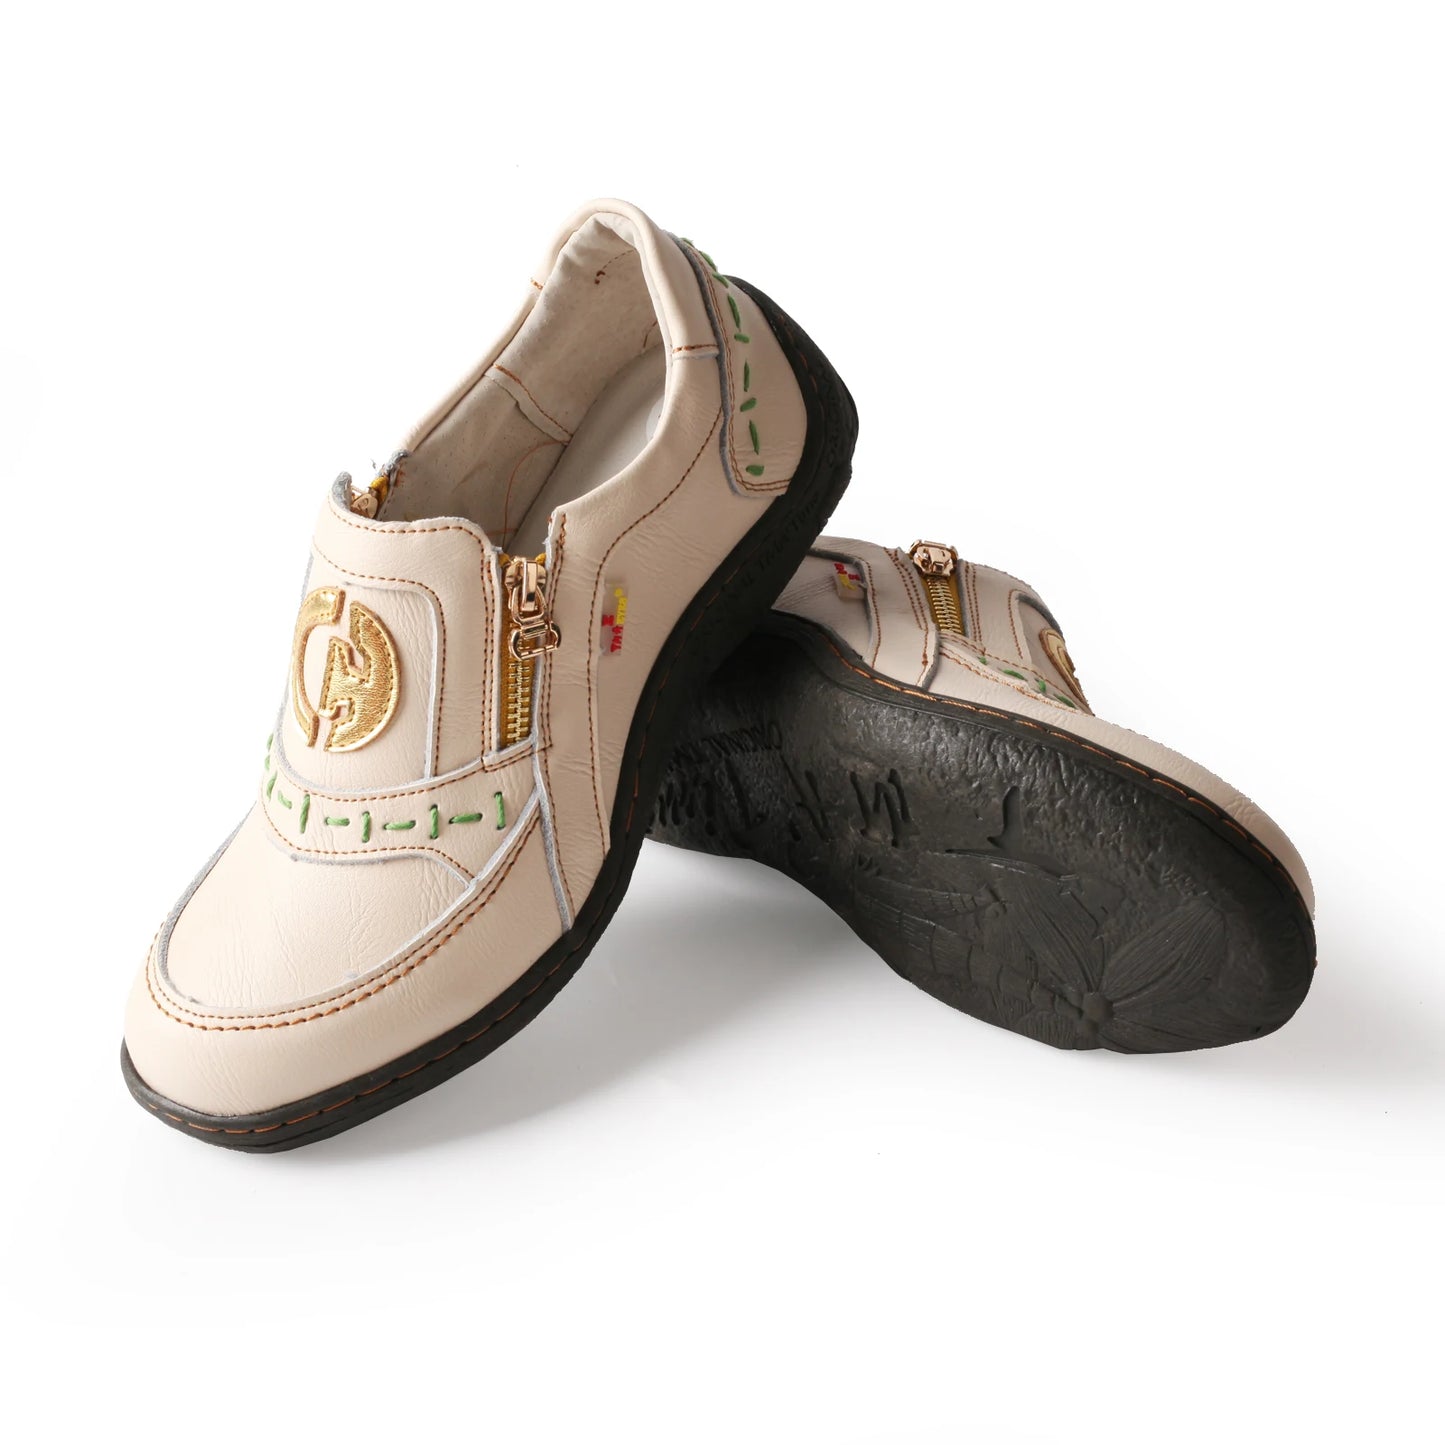 "Timeless Elegance: Classic Harmony Laceless Loafers for Sophisticated Comfort"